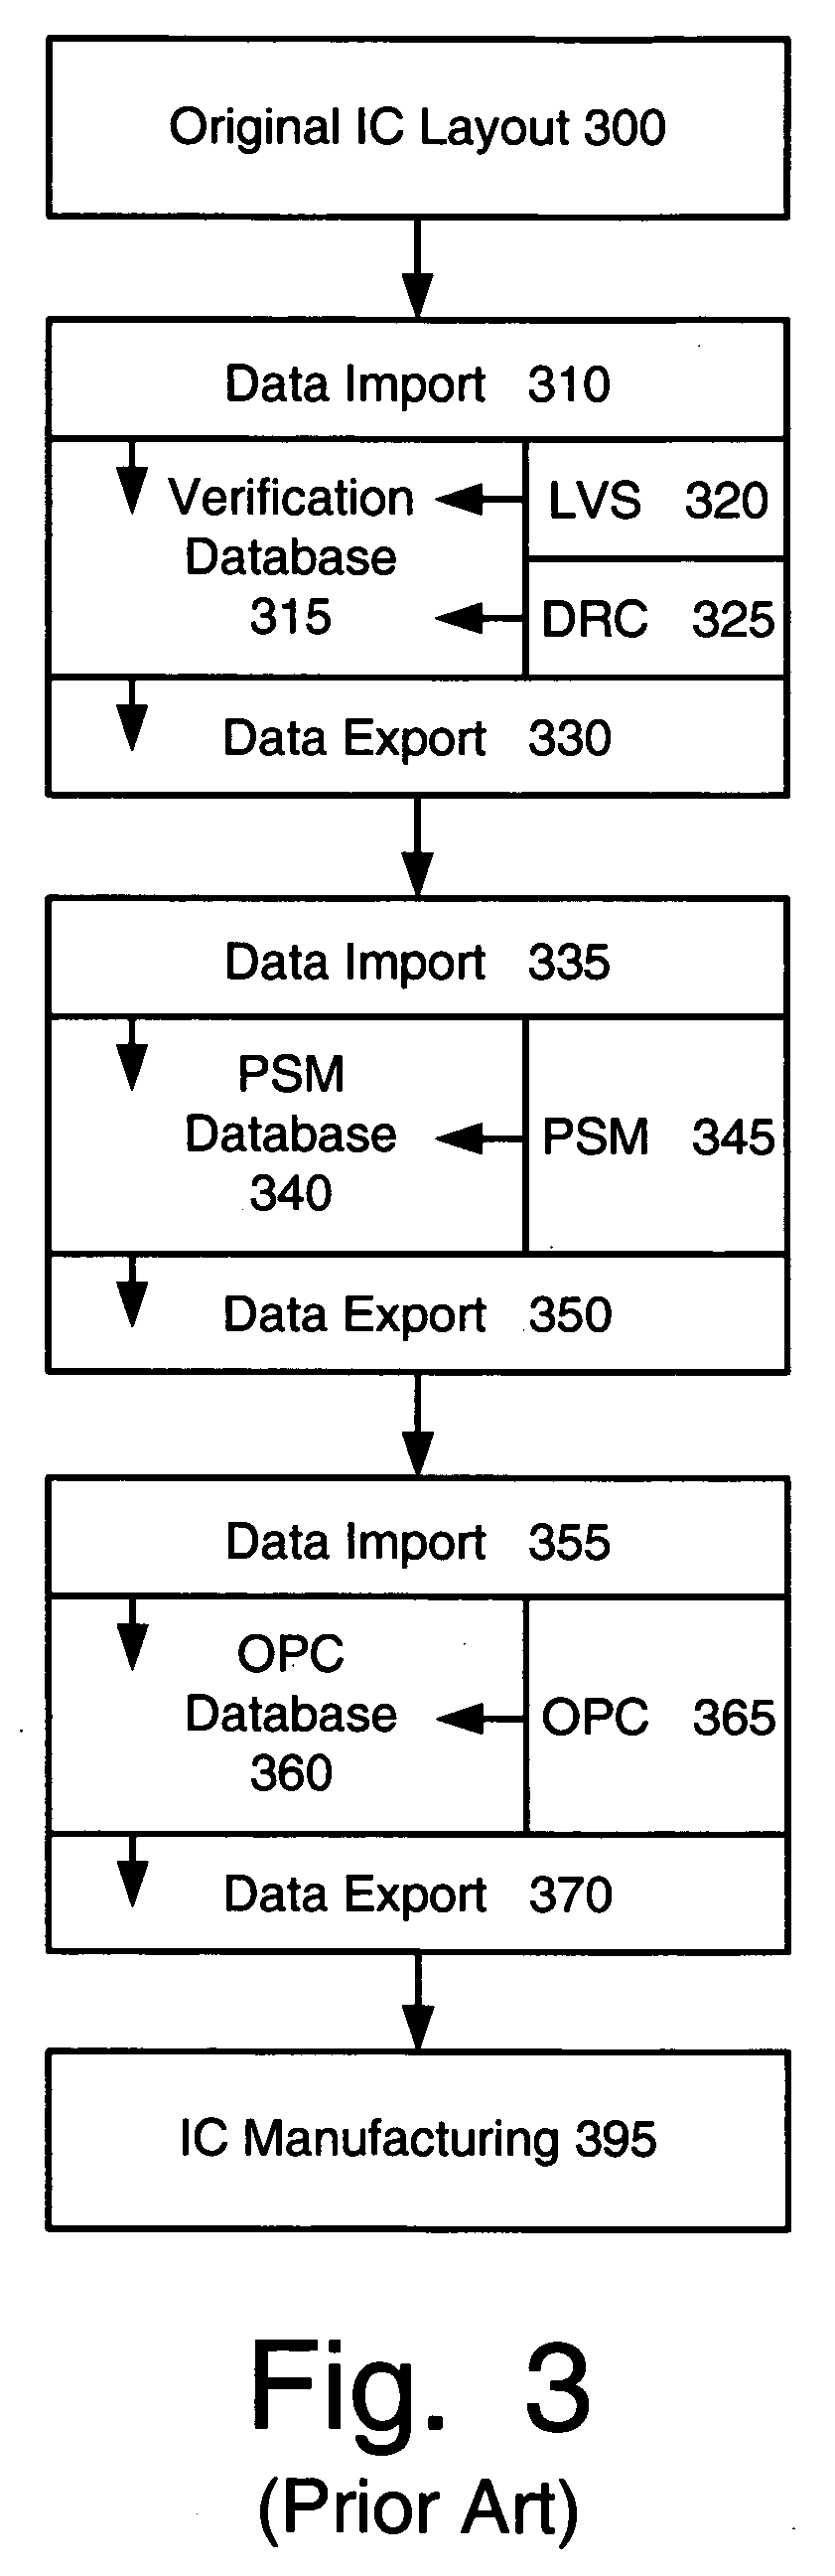 In-line XOR checking of master cells during integrated circuit design rule checking